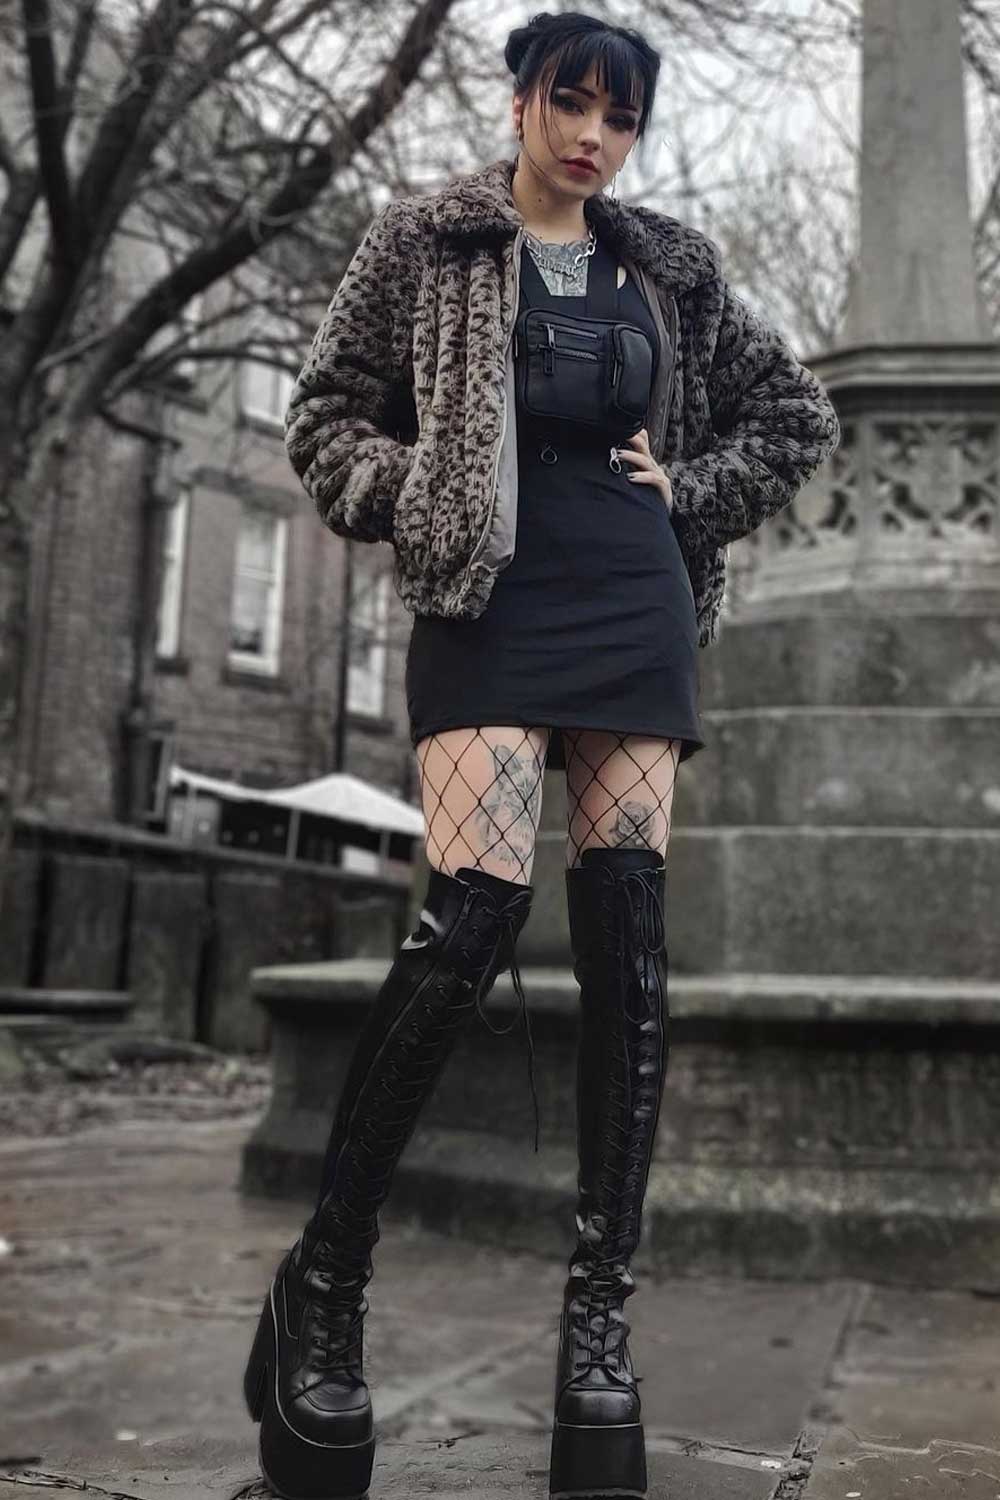 Black Mini Dress with Over The Knee Boots and Fur Jacket